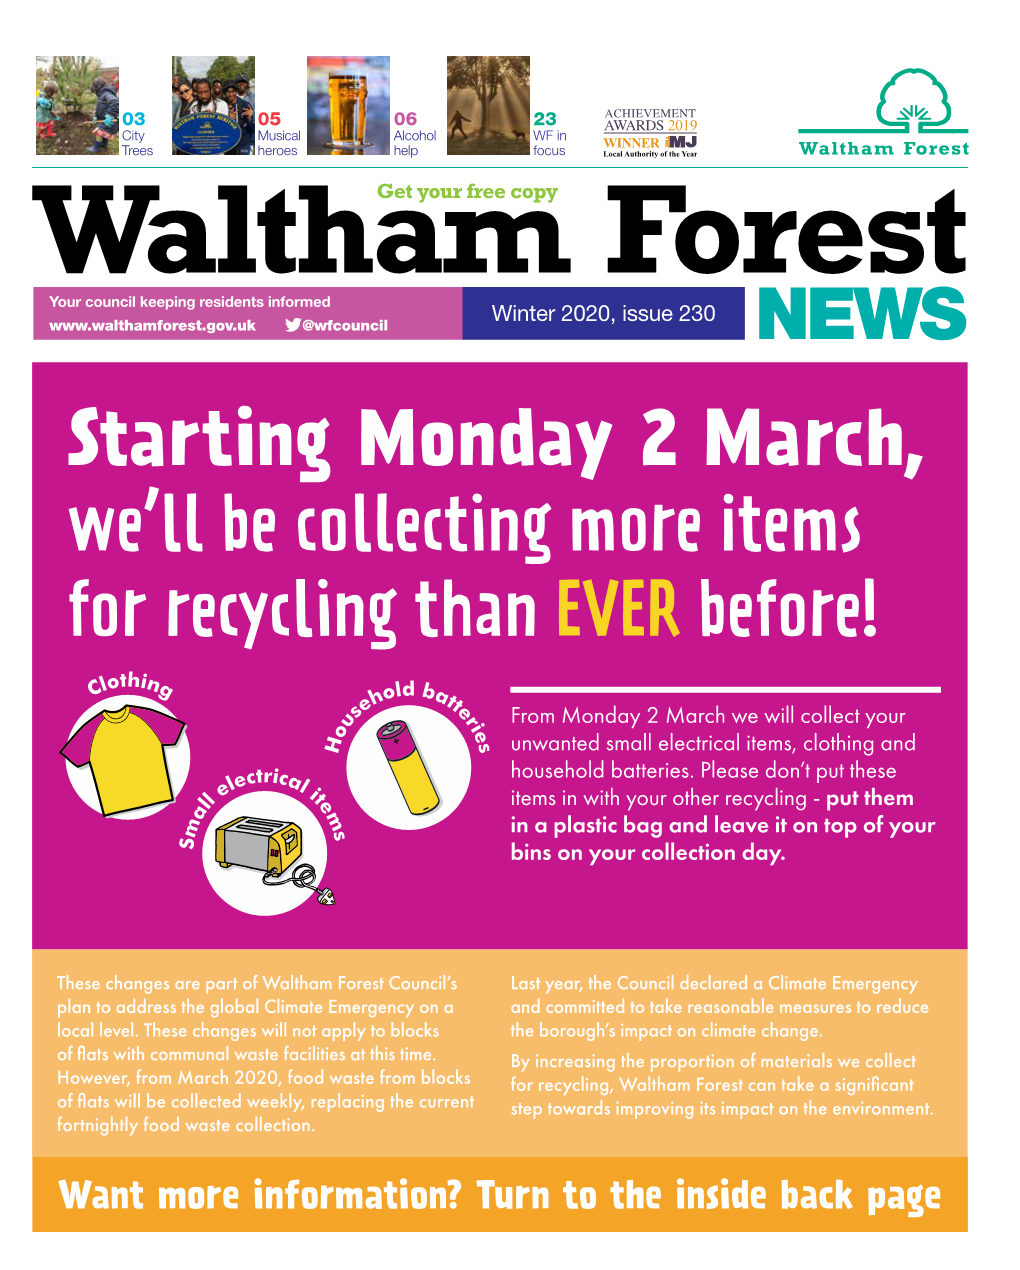 Starting Monday 2 March, We'll Be Collecting More Items for Recycling